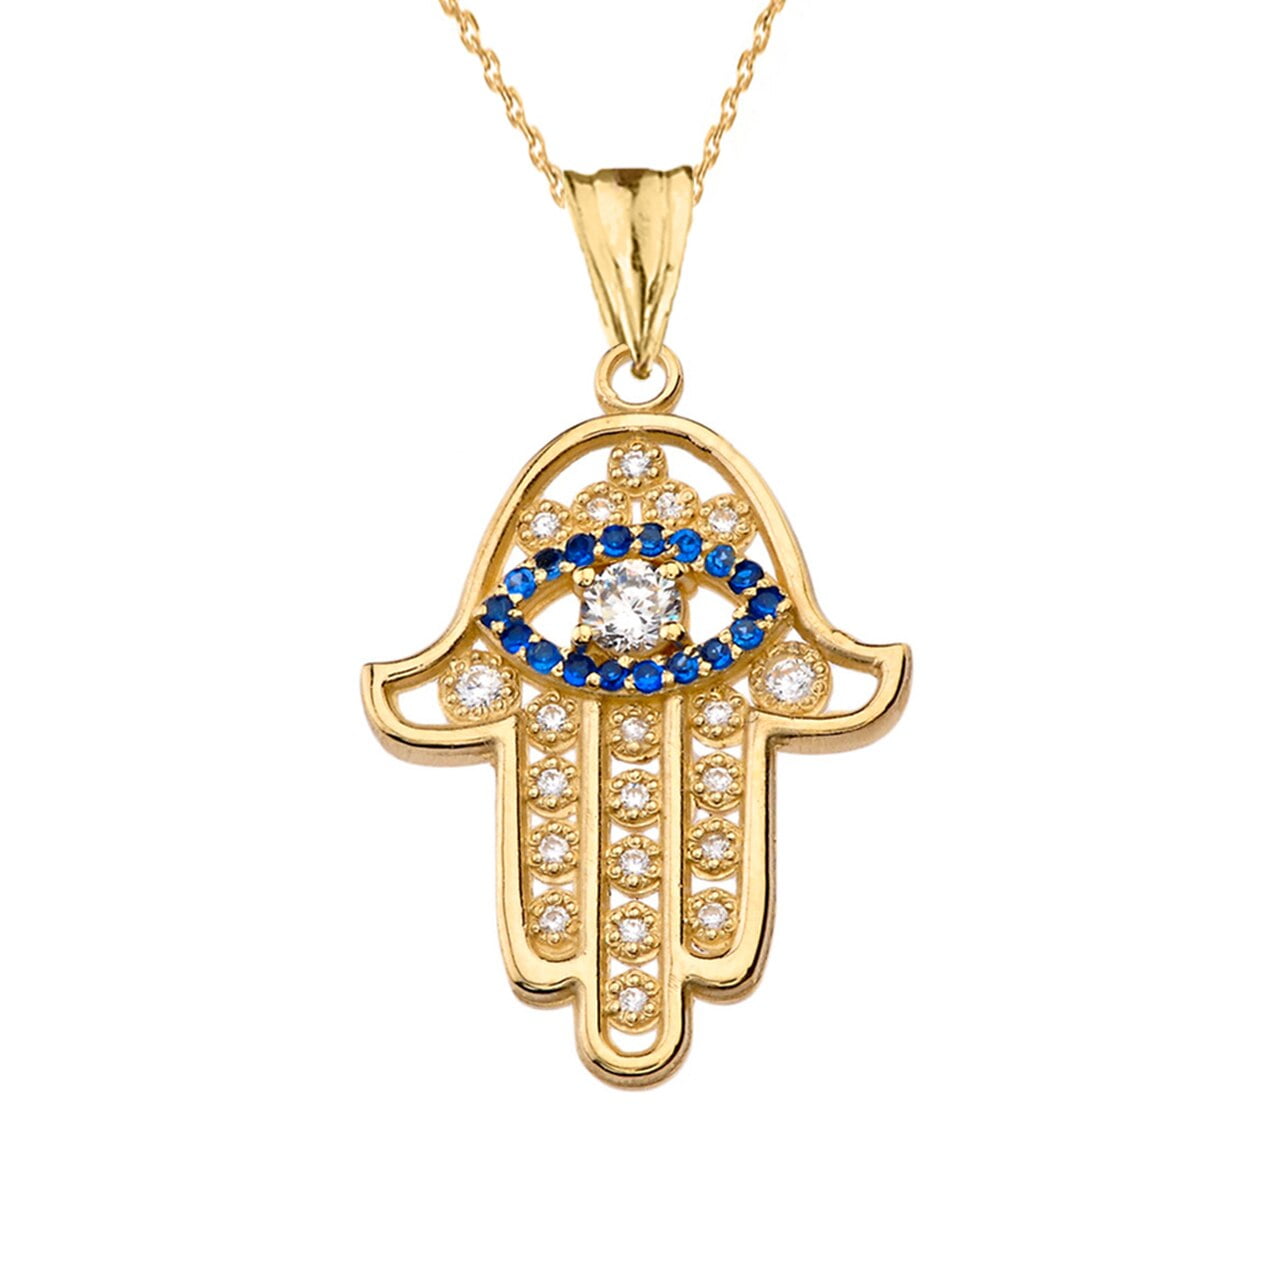 Pave Diamond Horse Pendant Necklace Thanksgiving Gift 14K Gold 0.70 Ct 